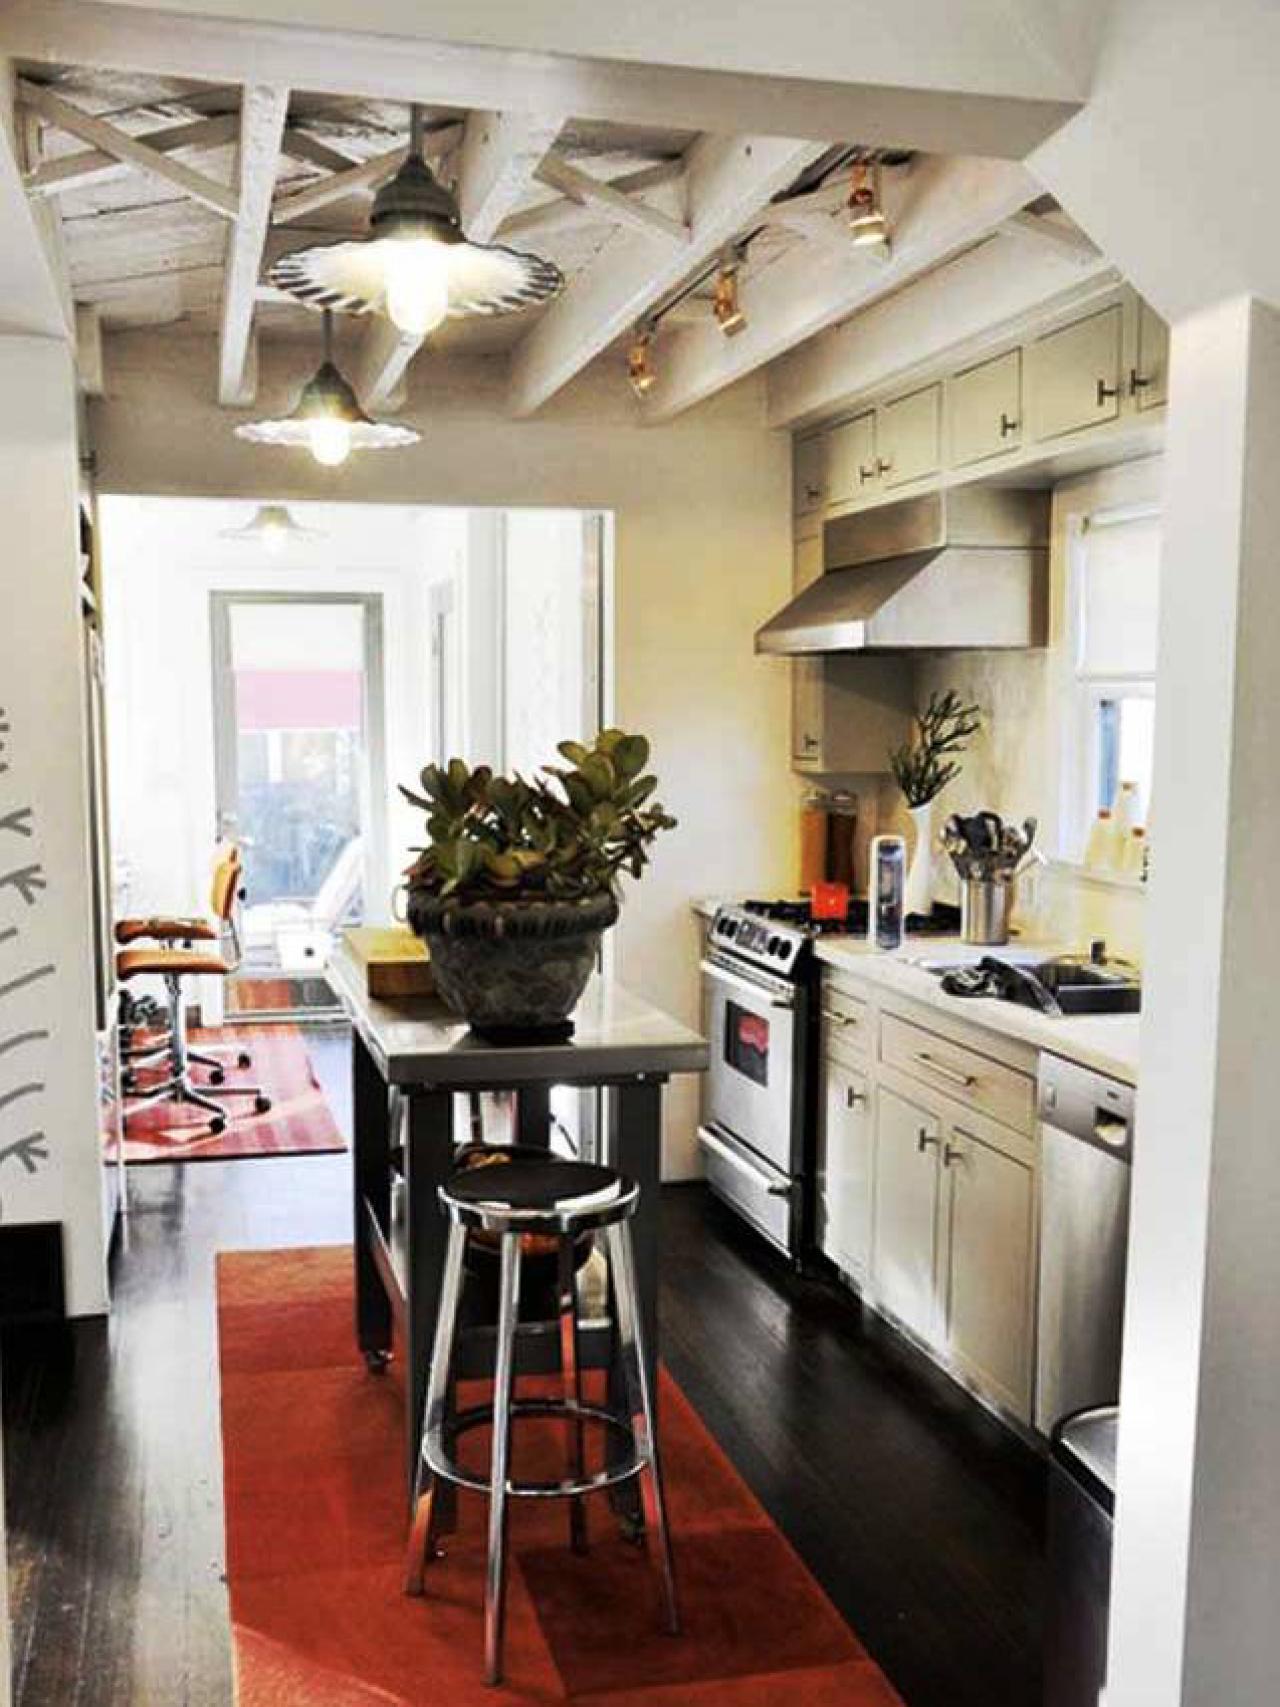  small space kitchen design pictures